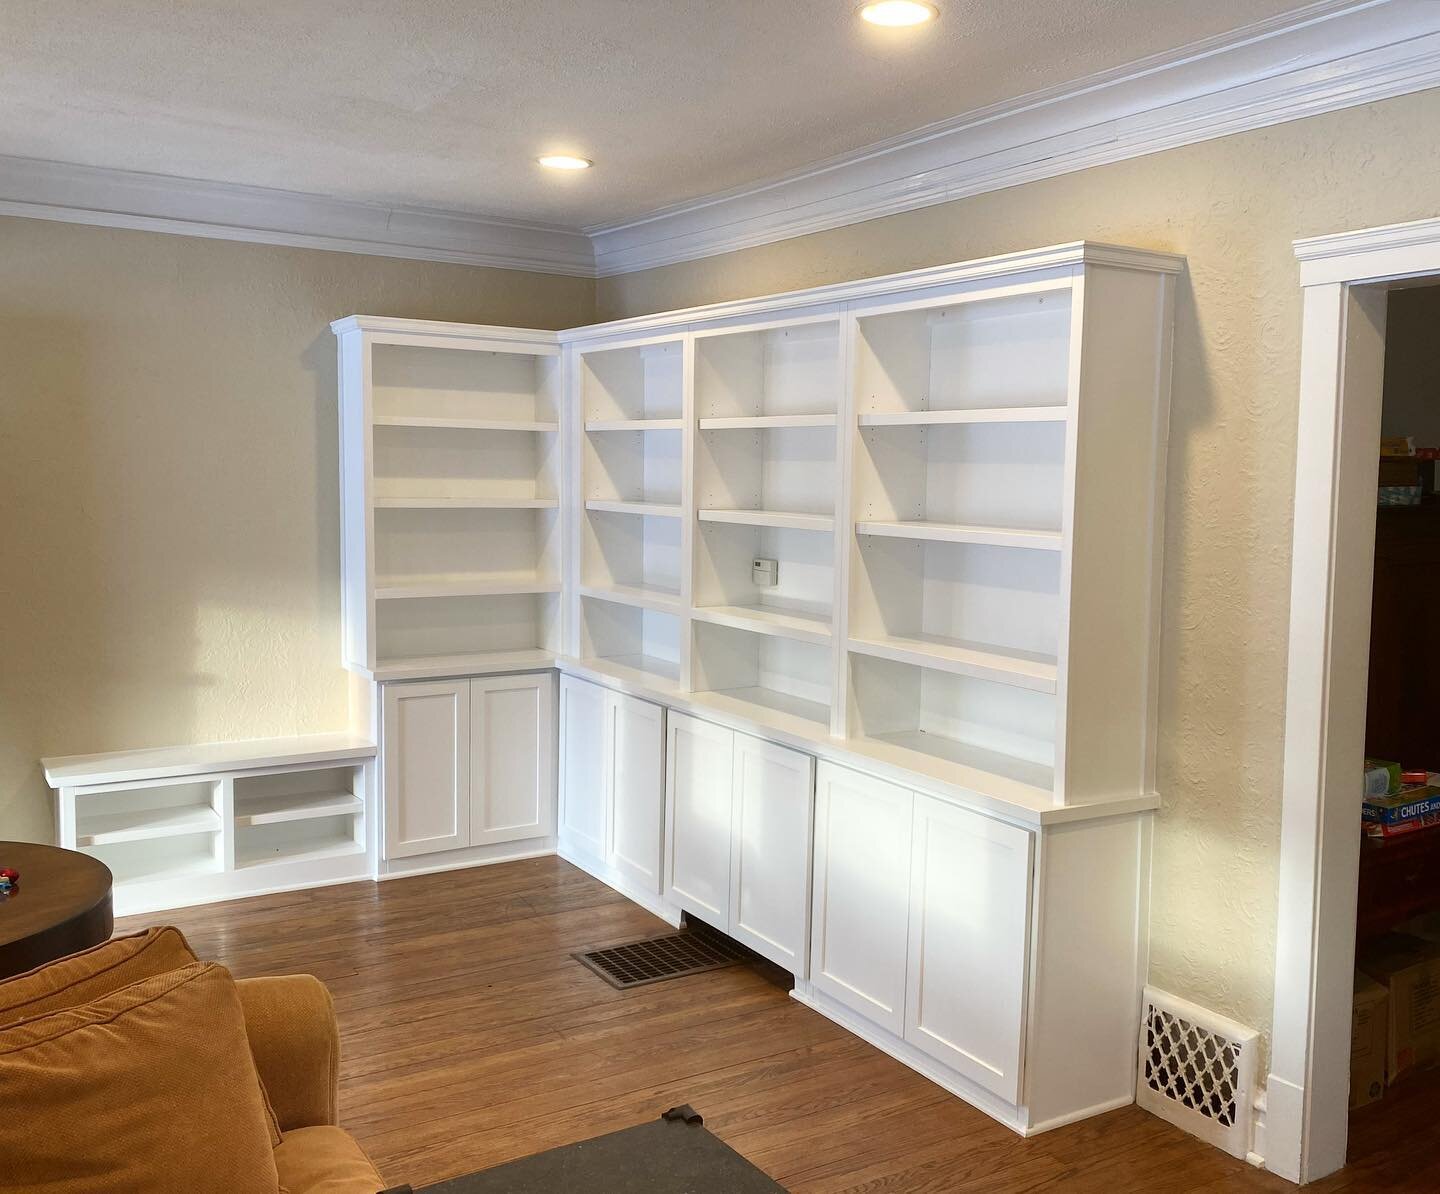 We gave this early 1900&rsquo;s Oak Park home a nice upgrade with wraparound shelving, complete with custom handcrafted trim to match the existing style and accommodations for heating vents. It fits perfectly and feels like it was always here.

#cust